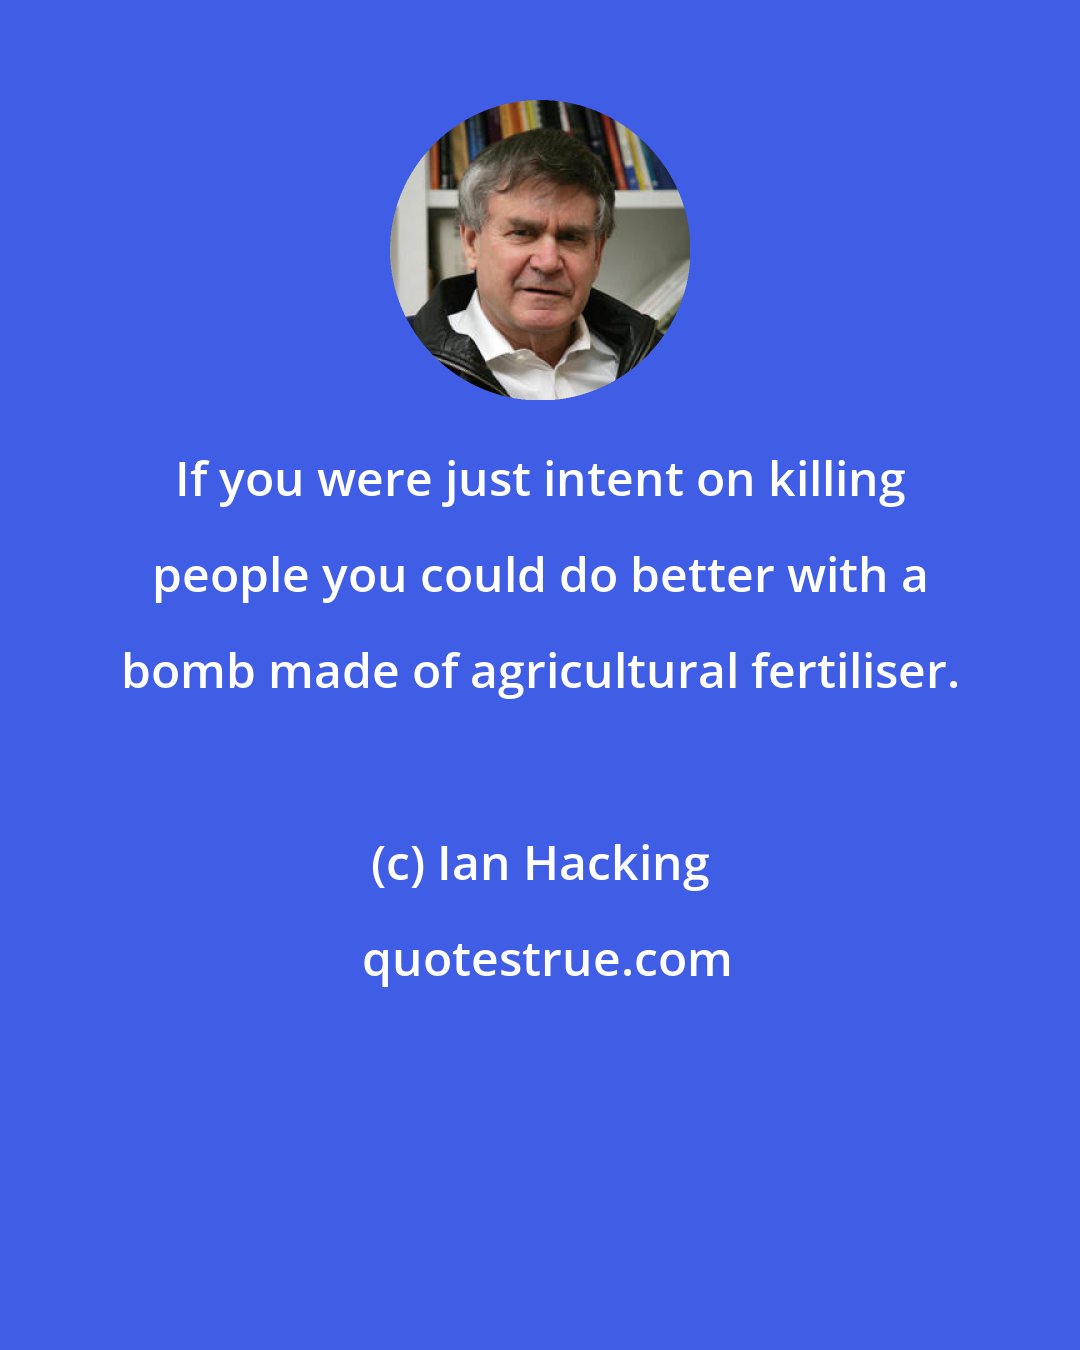 Ian Hacking: If you were just intent on killing people you could do better with a bomb made of agricultural fertiliser.